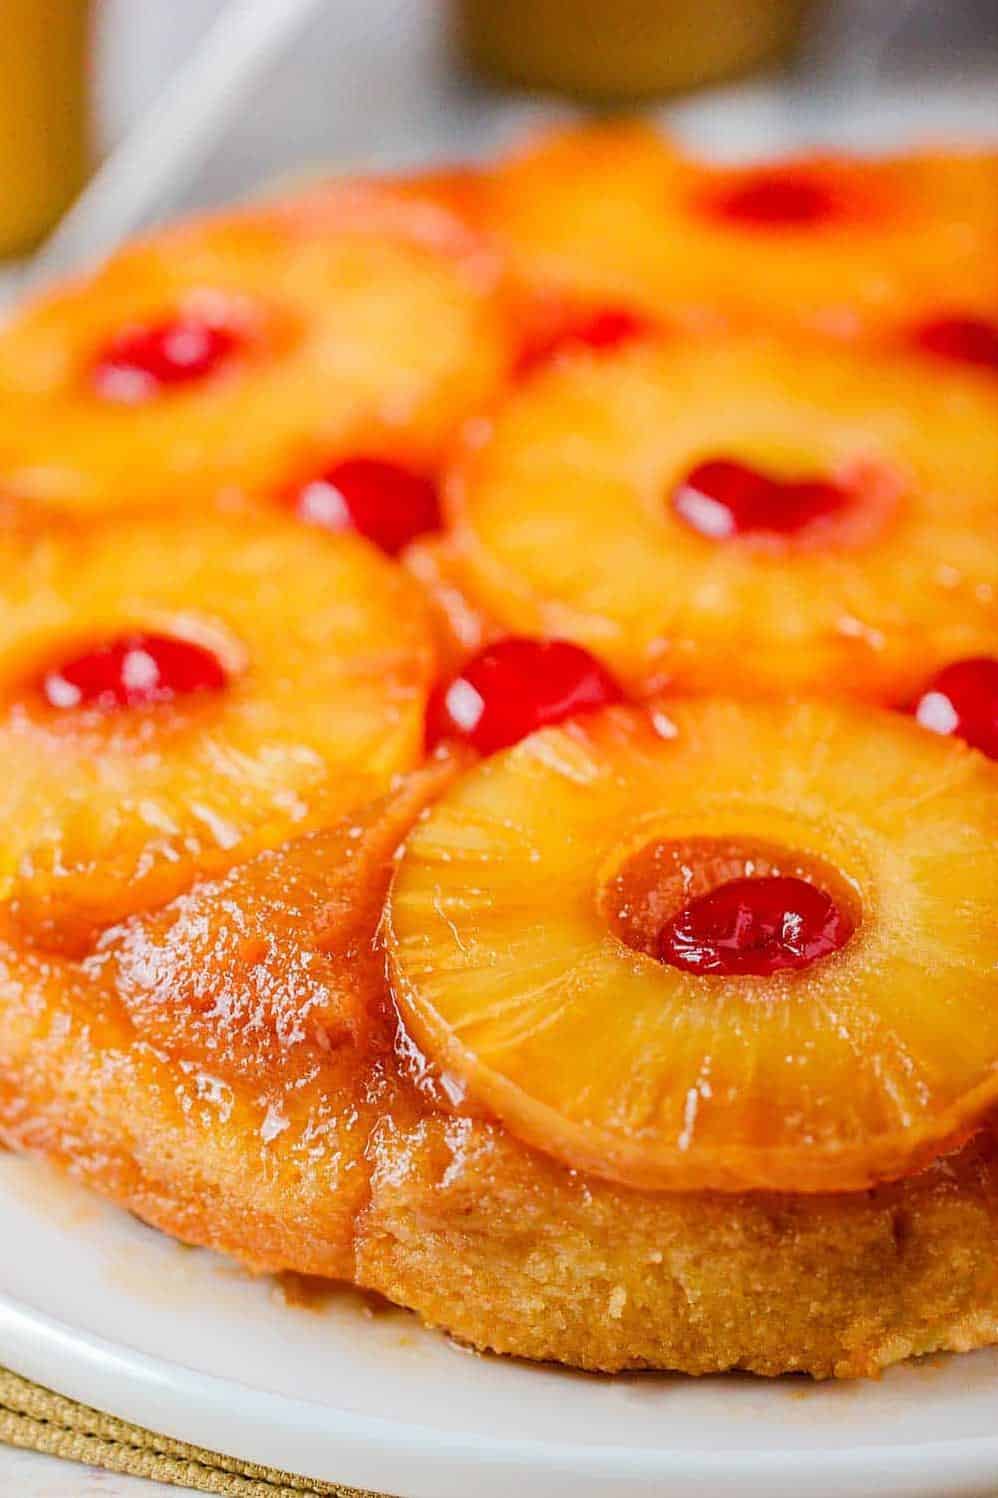  Who can resist the classic charm of an upside down cake?